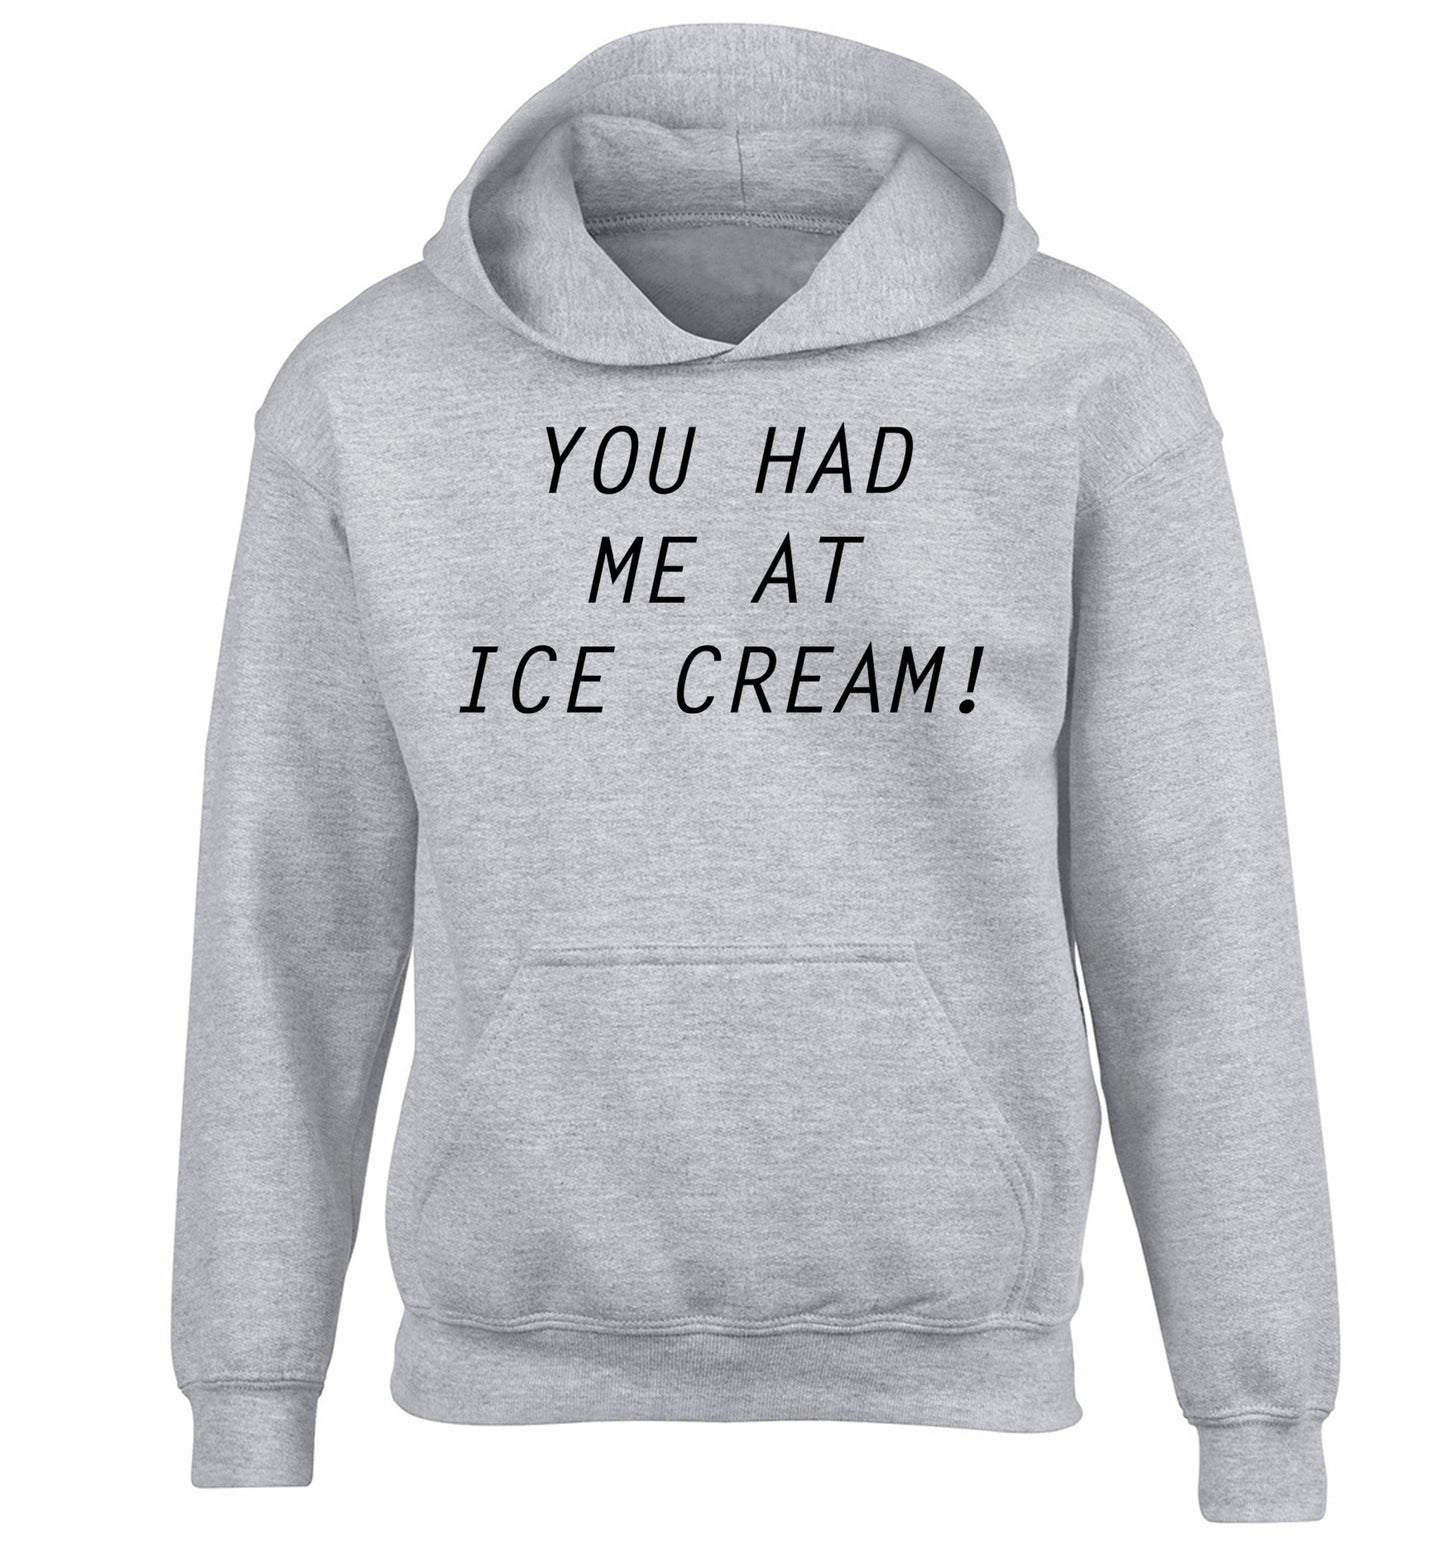 You had me at ice cream children's grey hoodie 12-14 Years